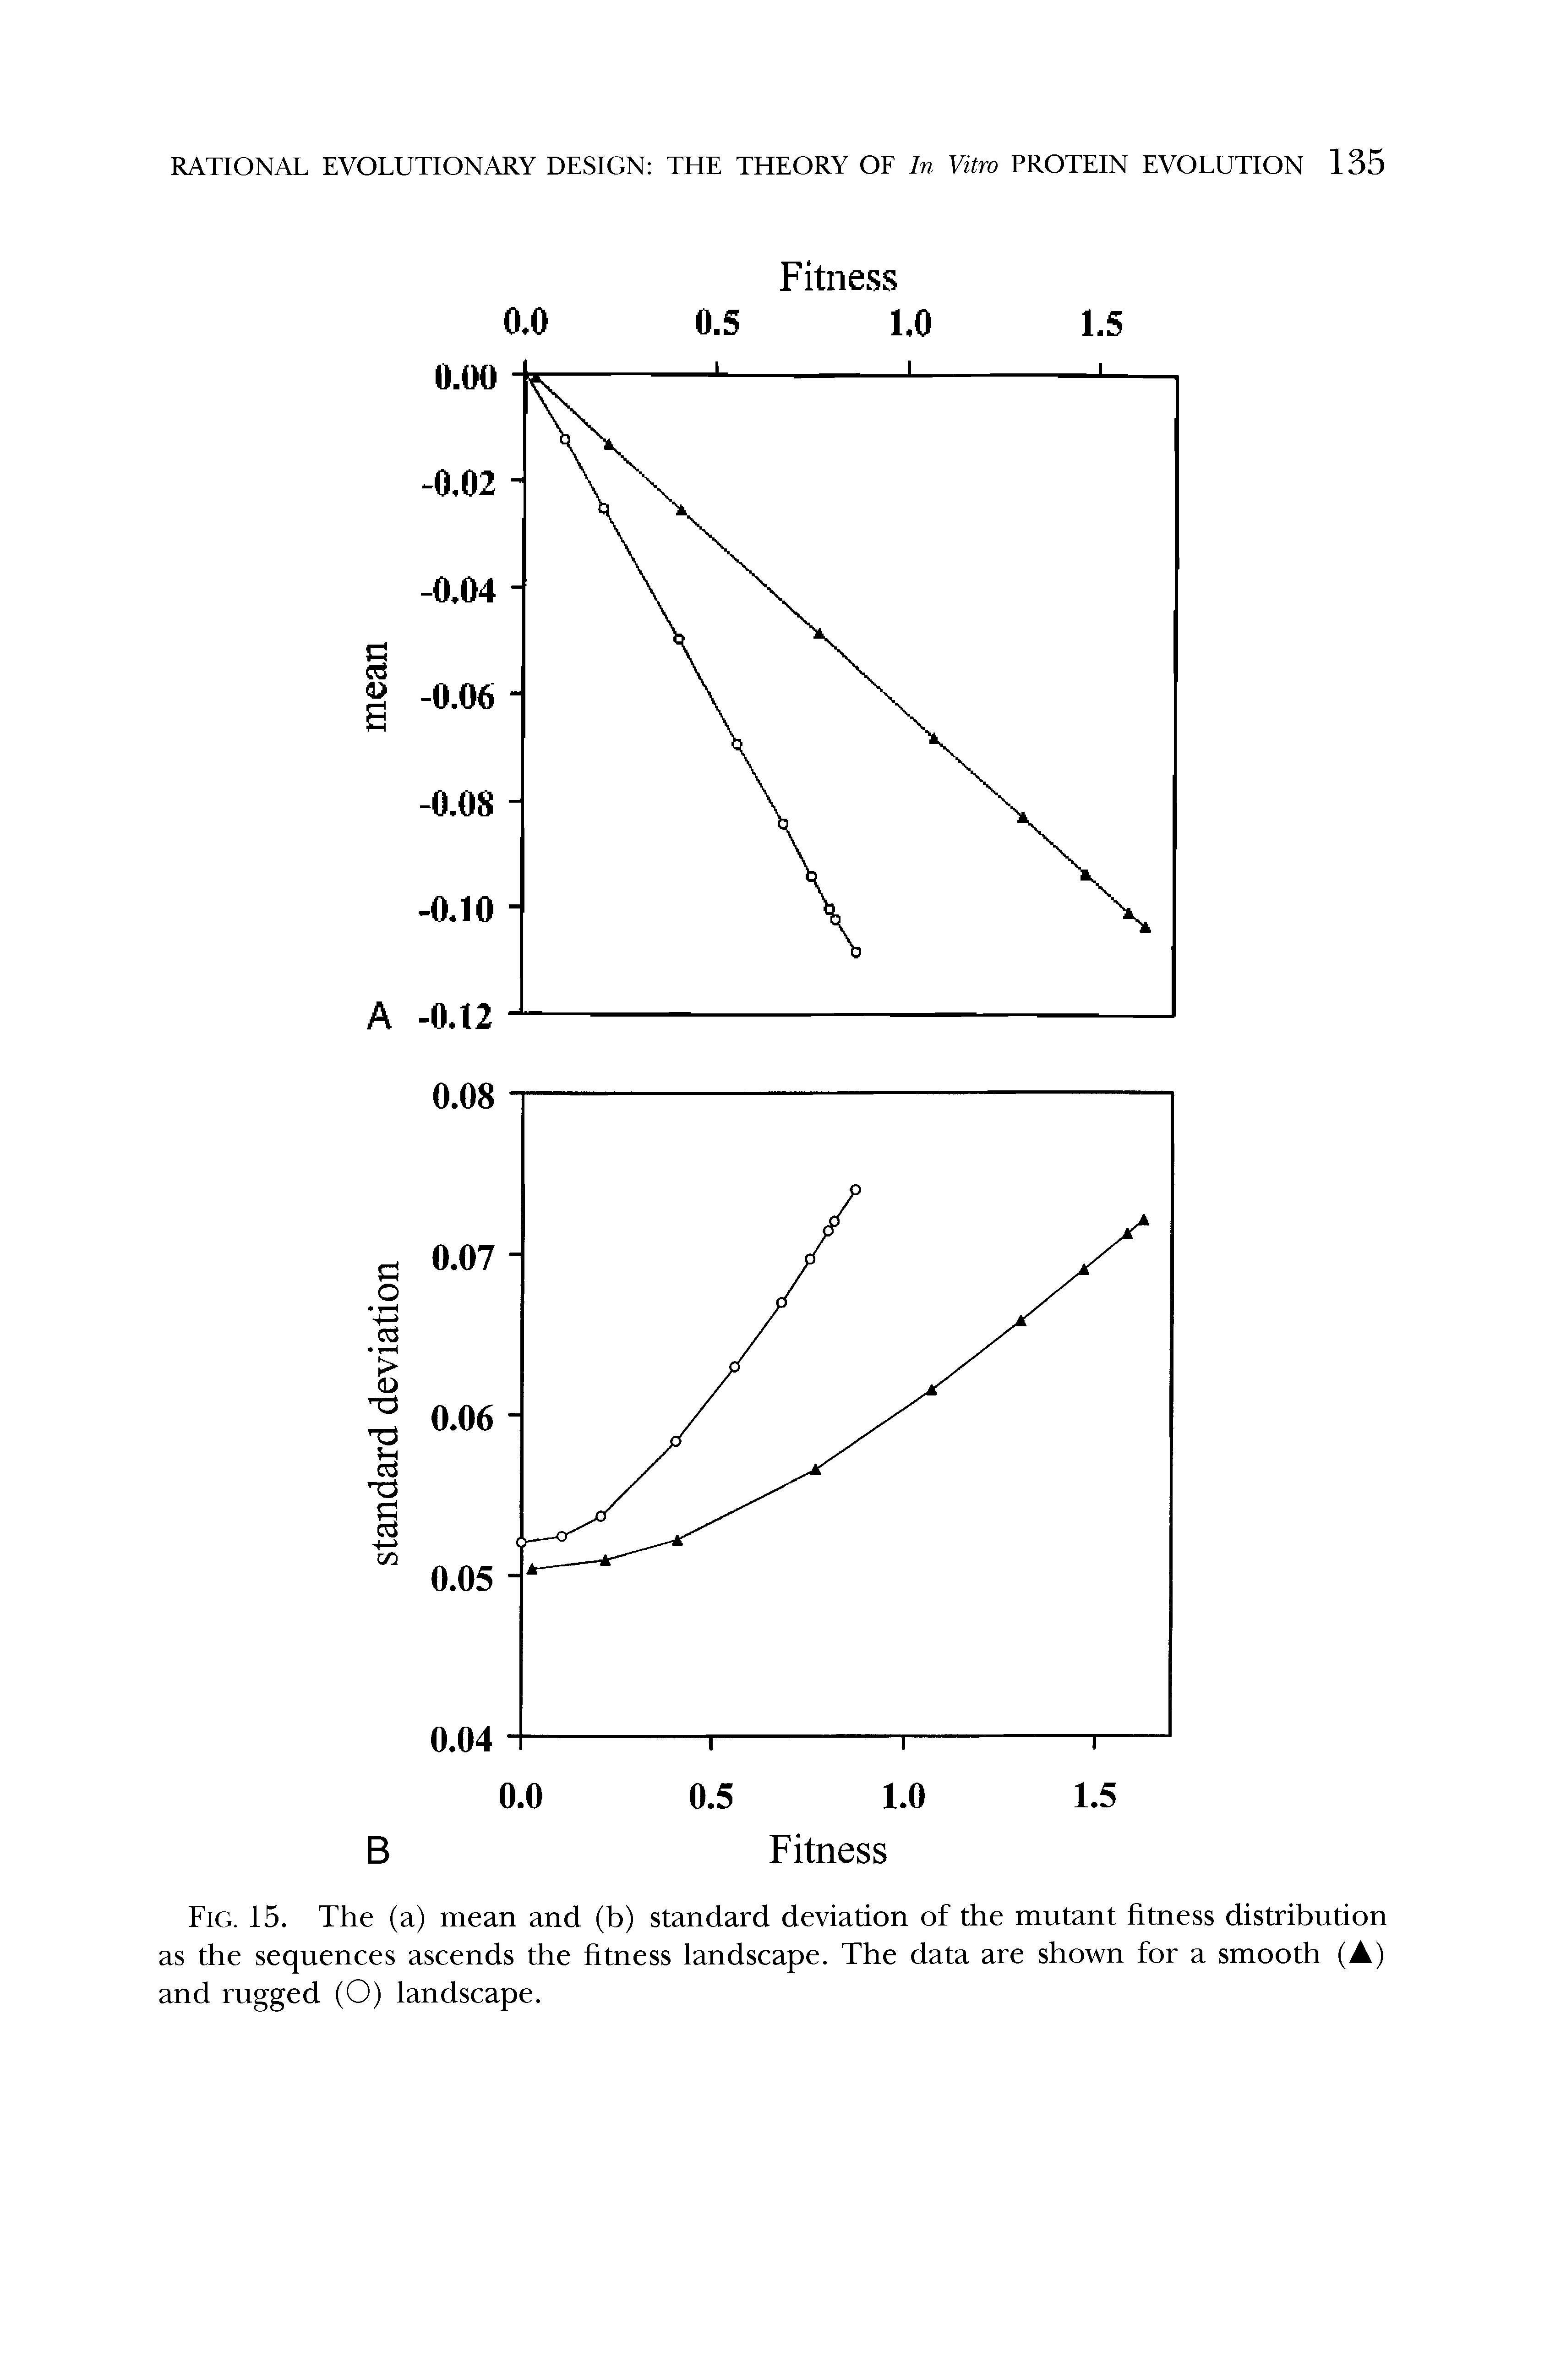 Fig. 15. The (a) mean and (b) standard deviation of the mutant fitness distribution as the sequences ascends the fitness landscape. The data are shown for a smooth (A) and rugged (O) landscape.